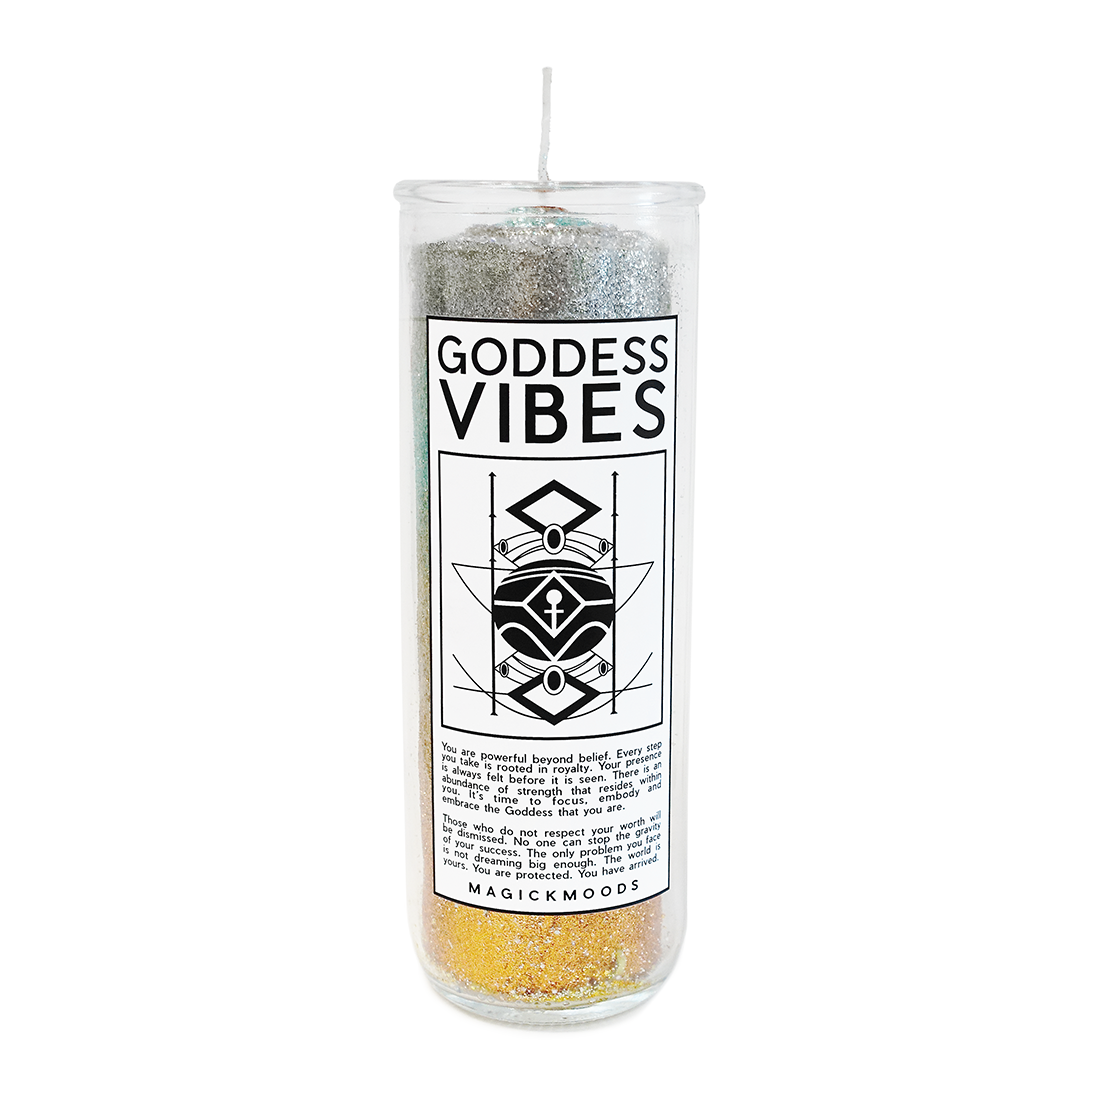 Goddess Vibes 7-Day Meditation Candle - PREORDER - Ships by July 28th, 2023